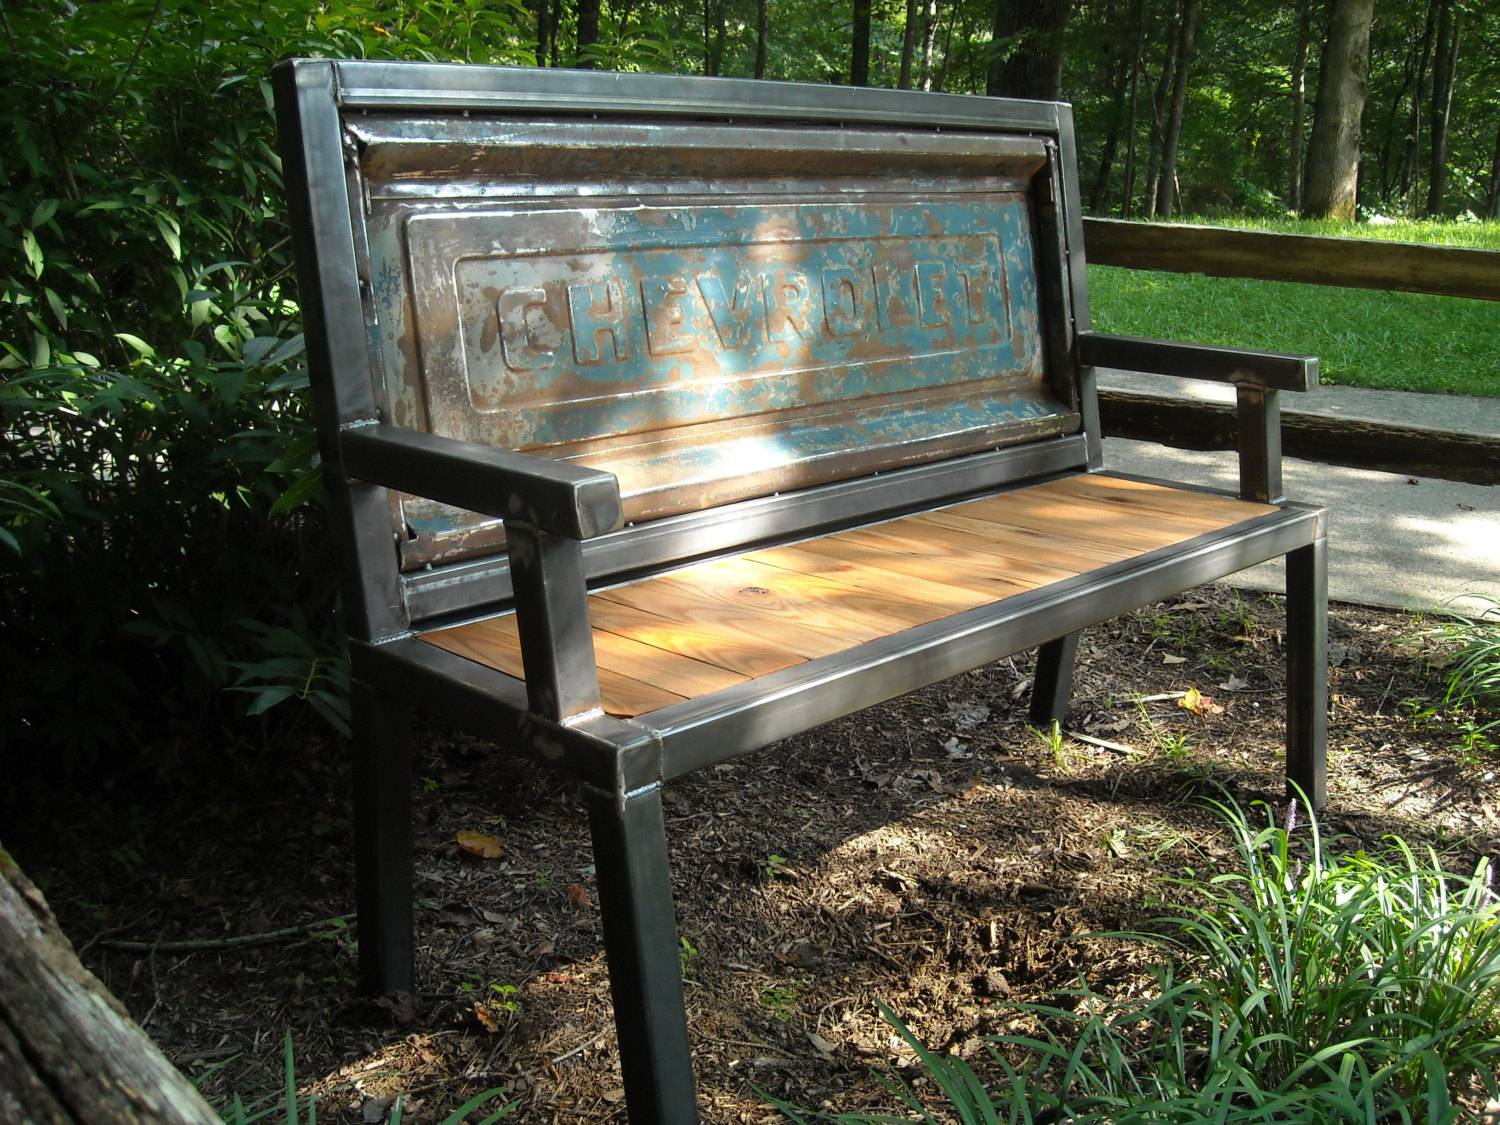 Diy Garden Bench Woodworking Projects